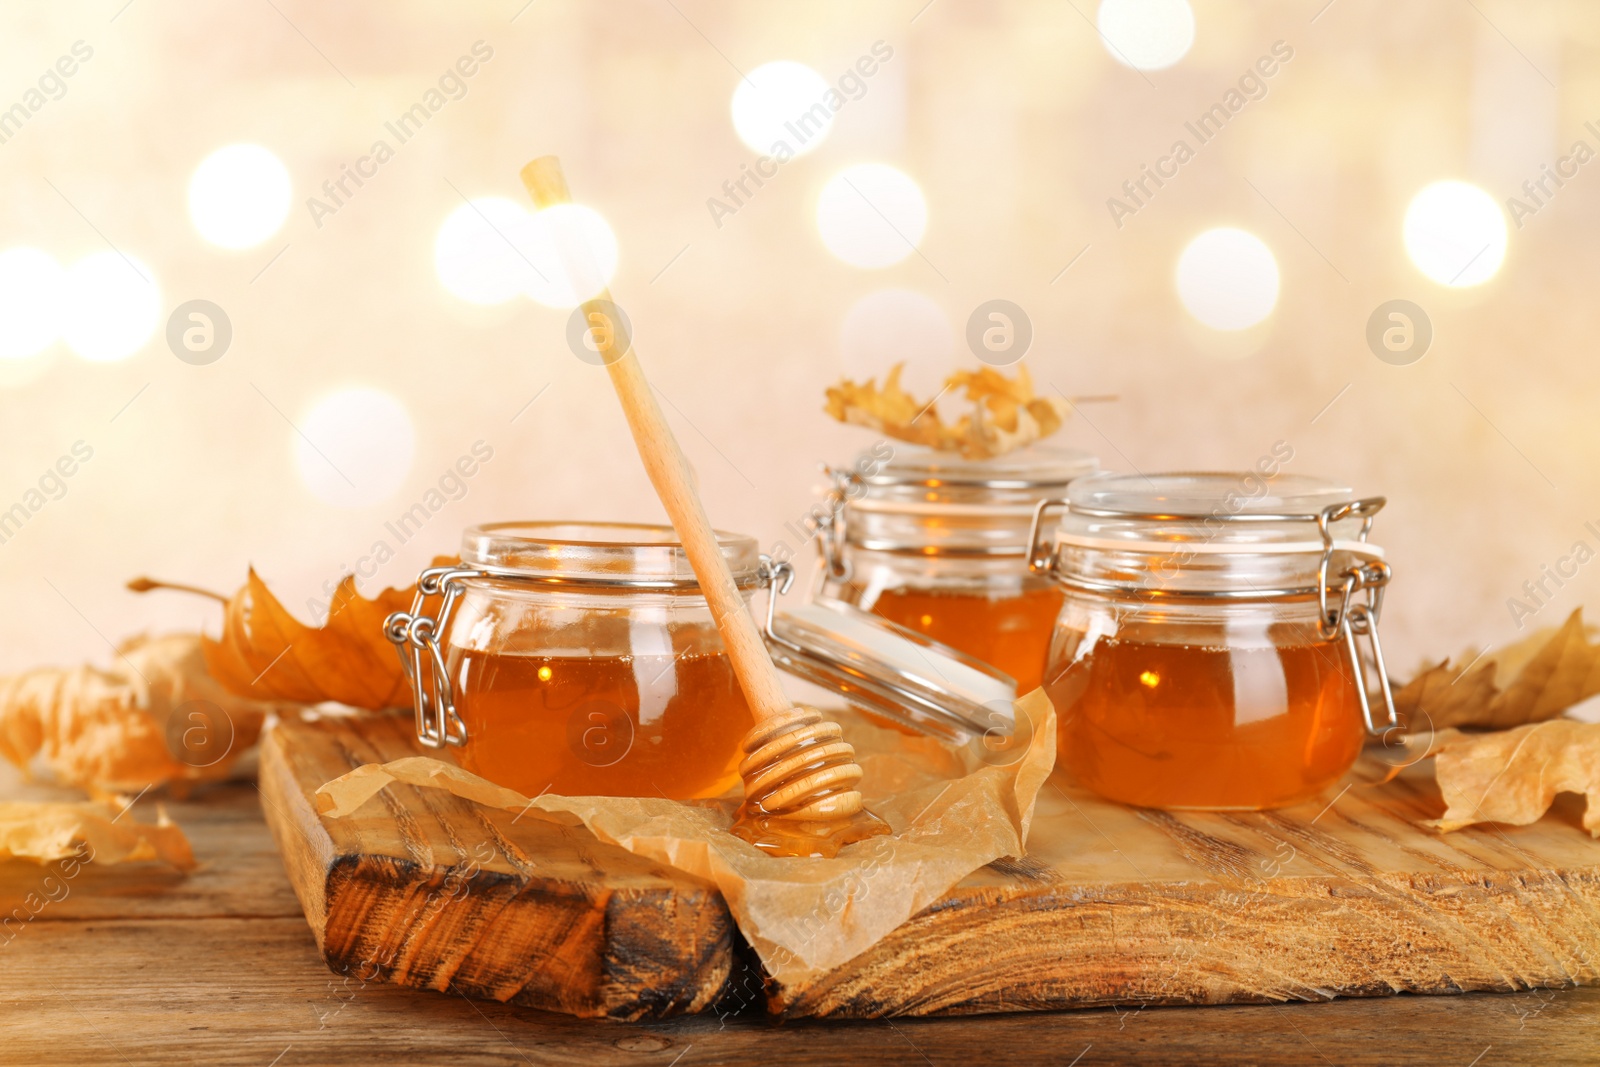 Photo of Dipper and jars with honey on table against blurred lights